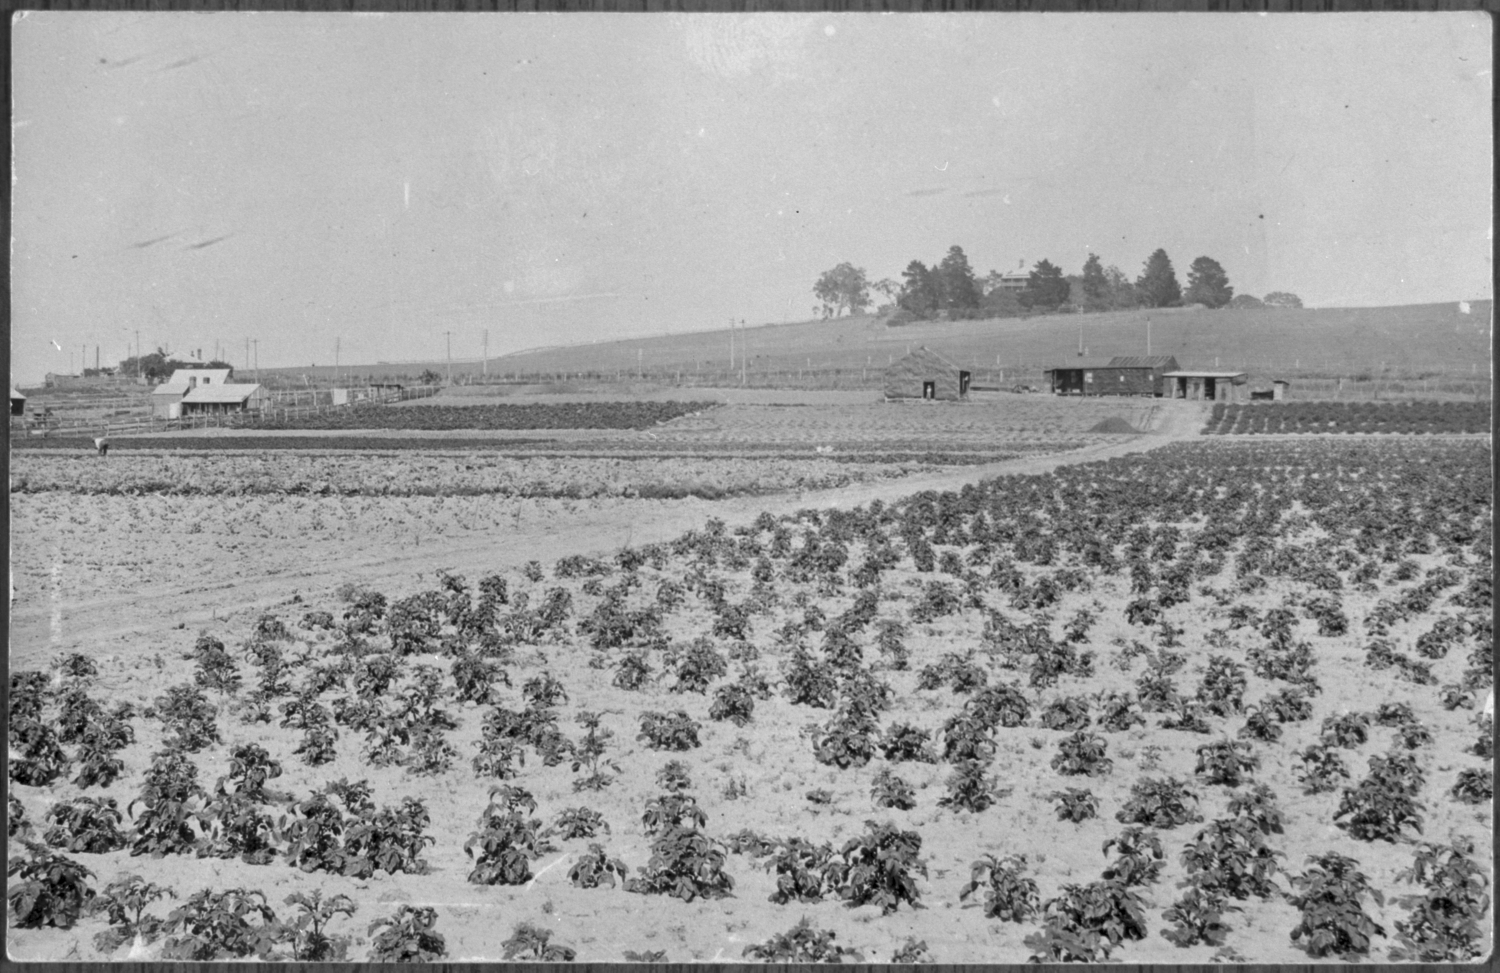 Photograph of market garden with crops in the front right, new seedlings in the front left, and farm buildings in the background.